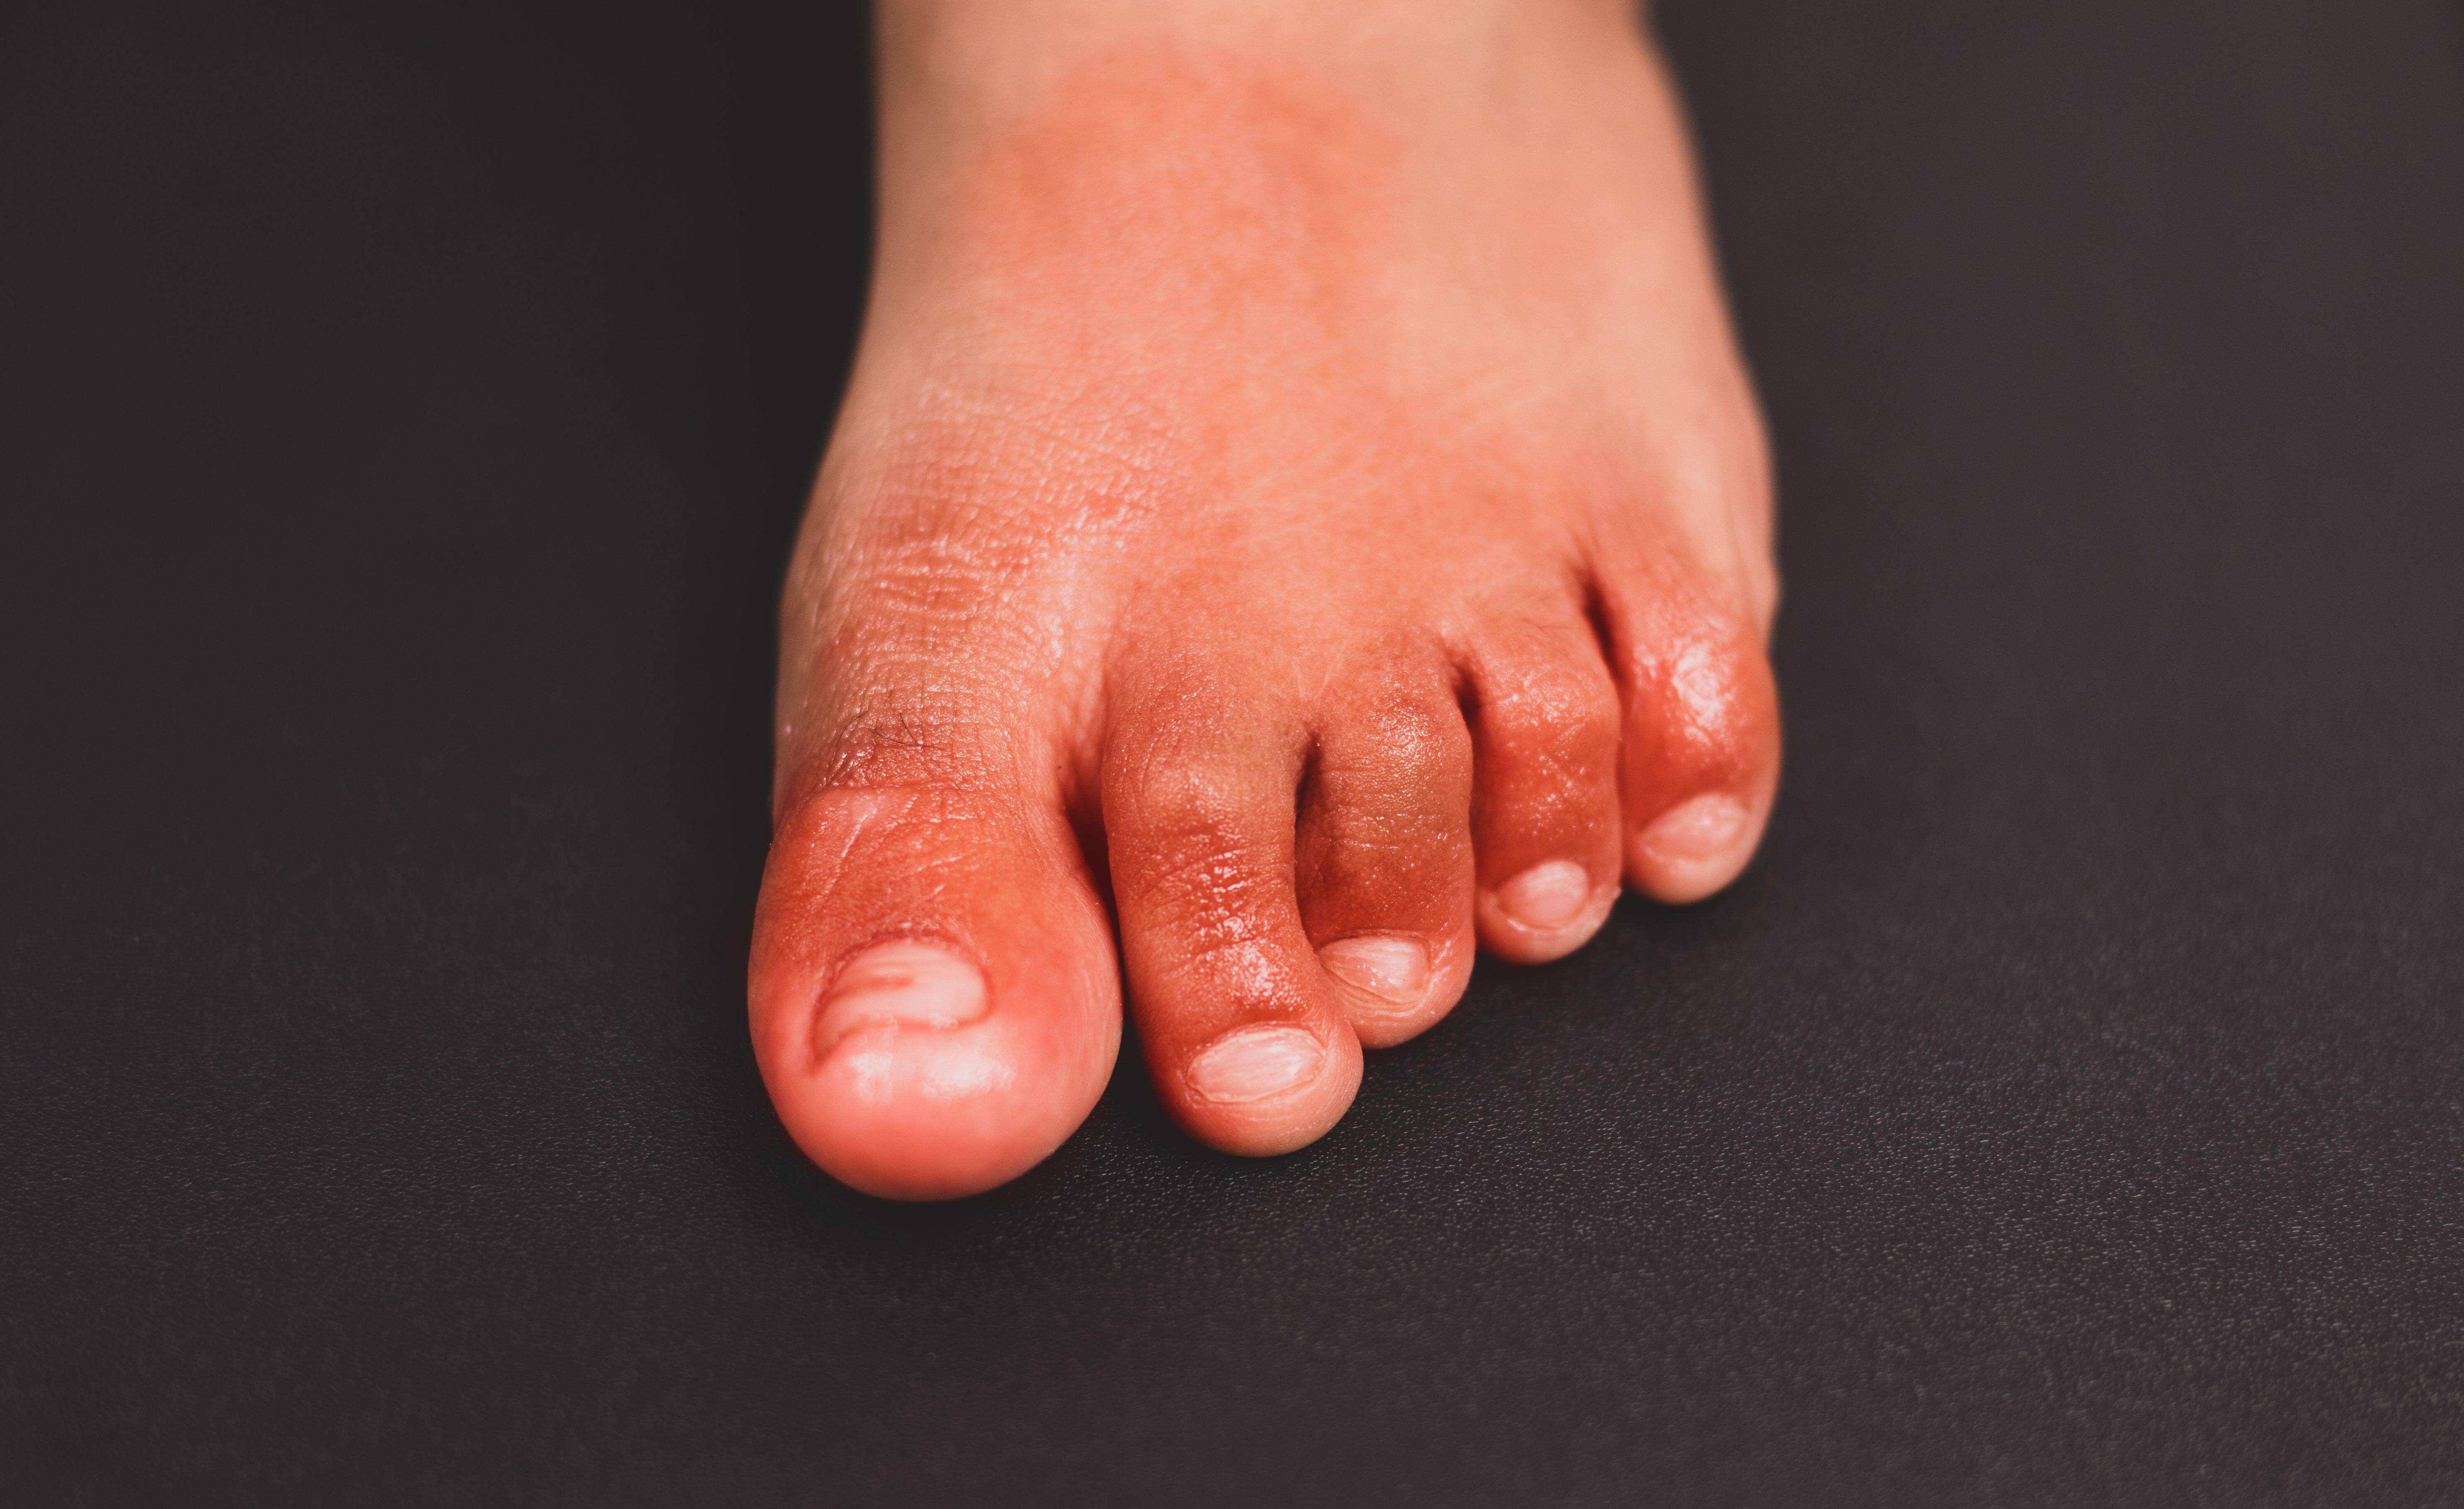 Are 'COVID Toes' Actually Caused by the Coronavirus? - Scientific American